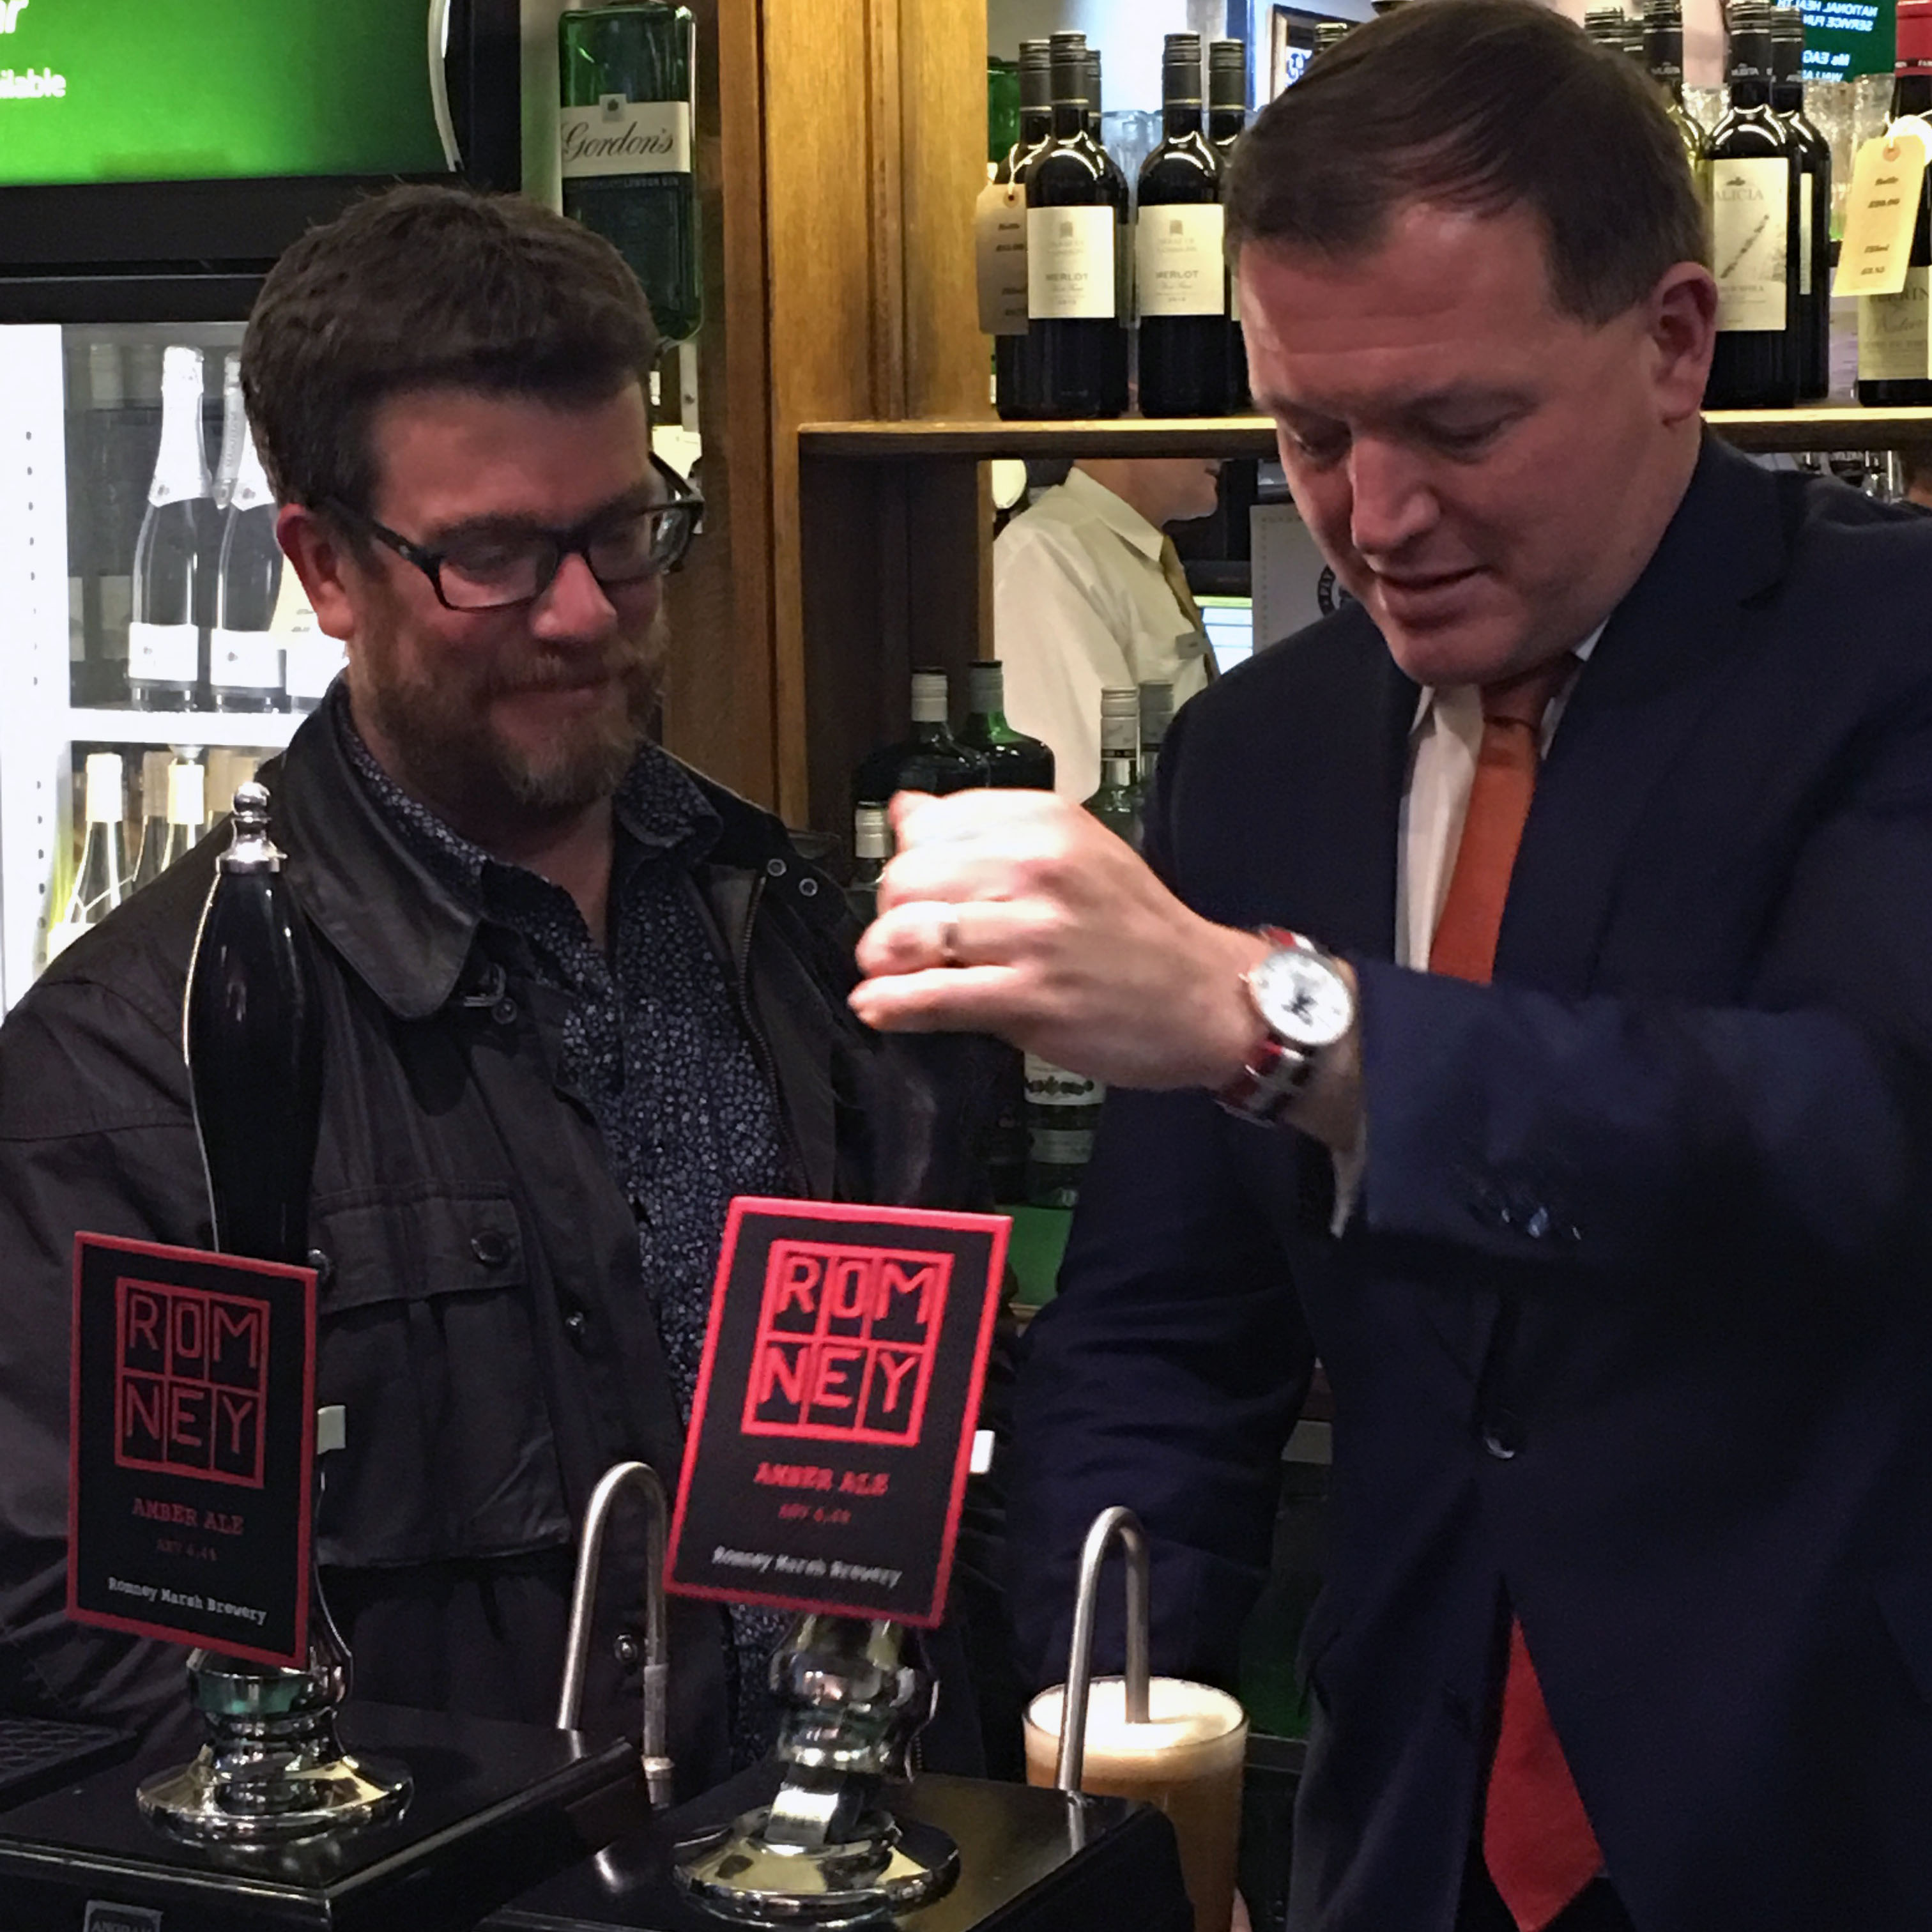 Local MP Damian Collins pours a pint of Romney Amber at House of Commons